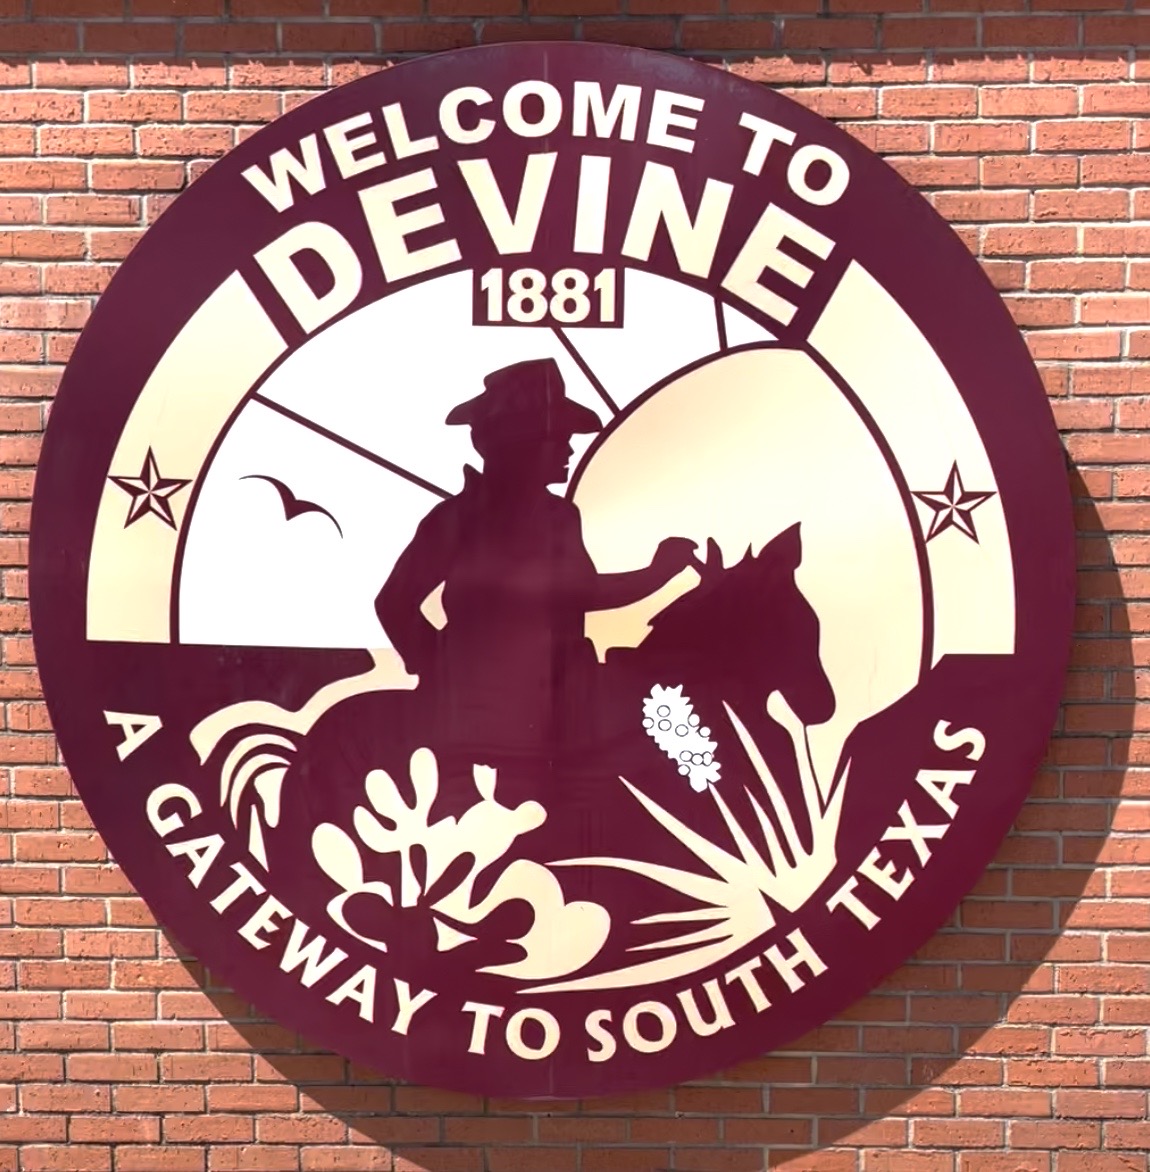 Welcome to Devine - Gateway to South Texas. Established 1881. City emblem.